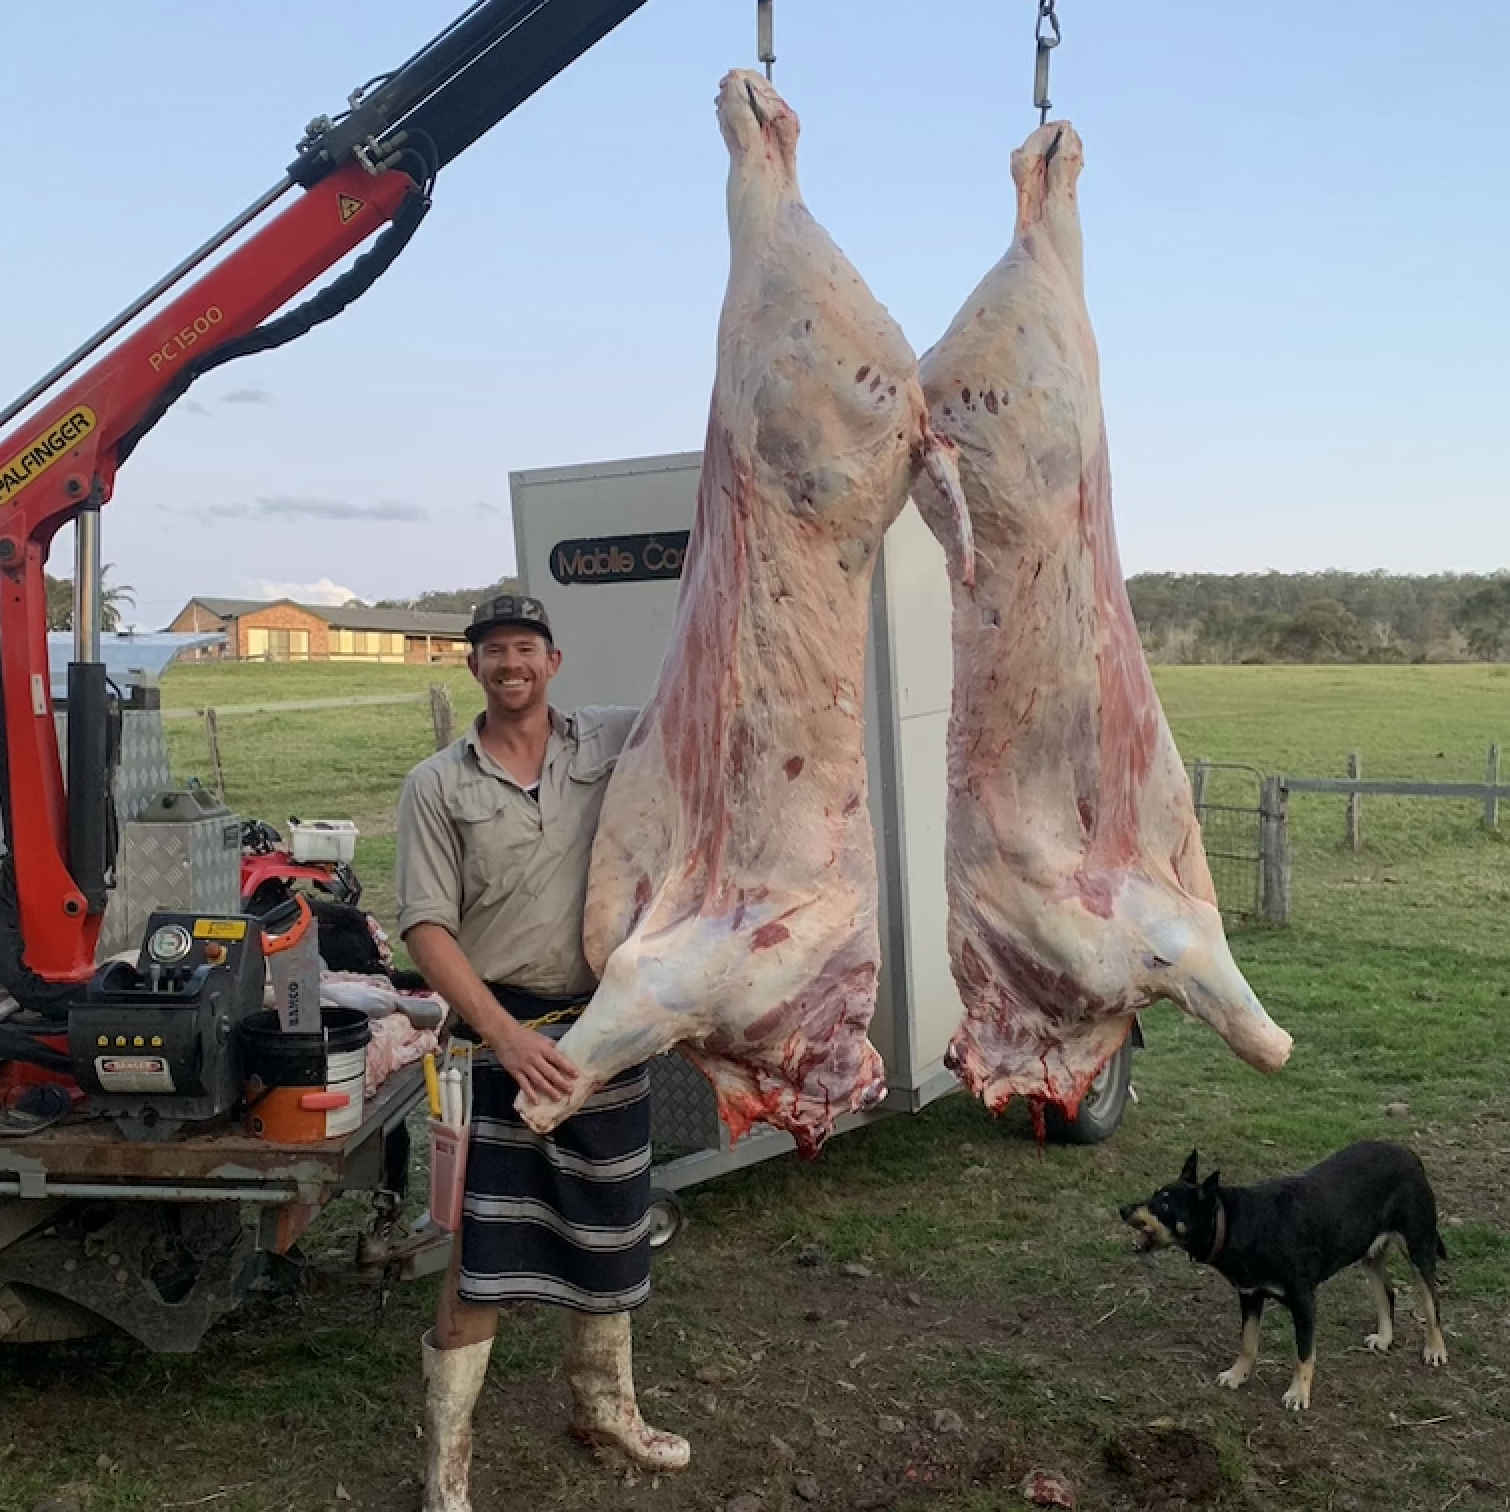 The mobile butcher: From paddock to produce and then to plate